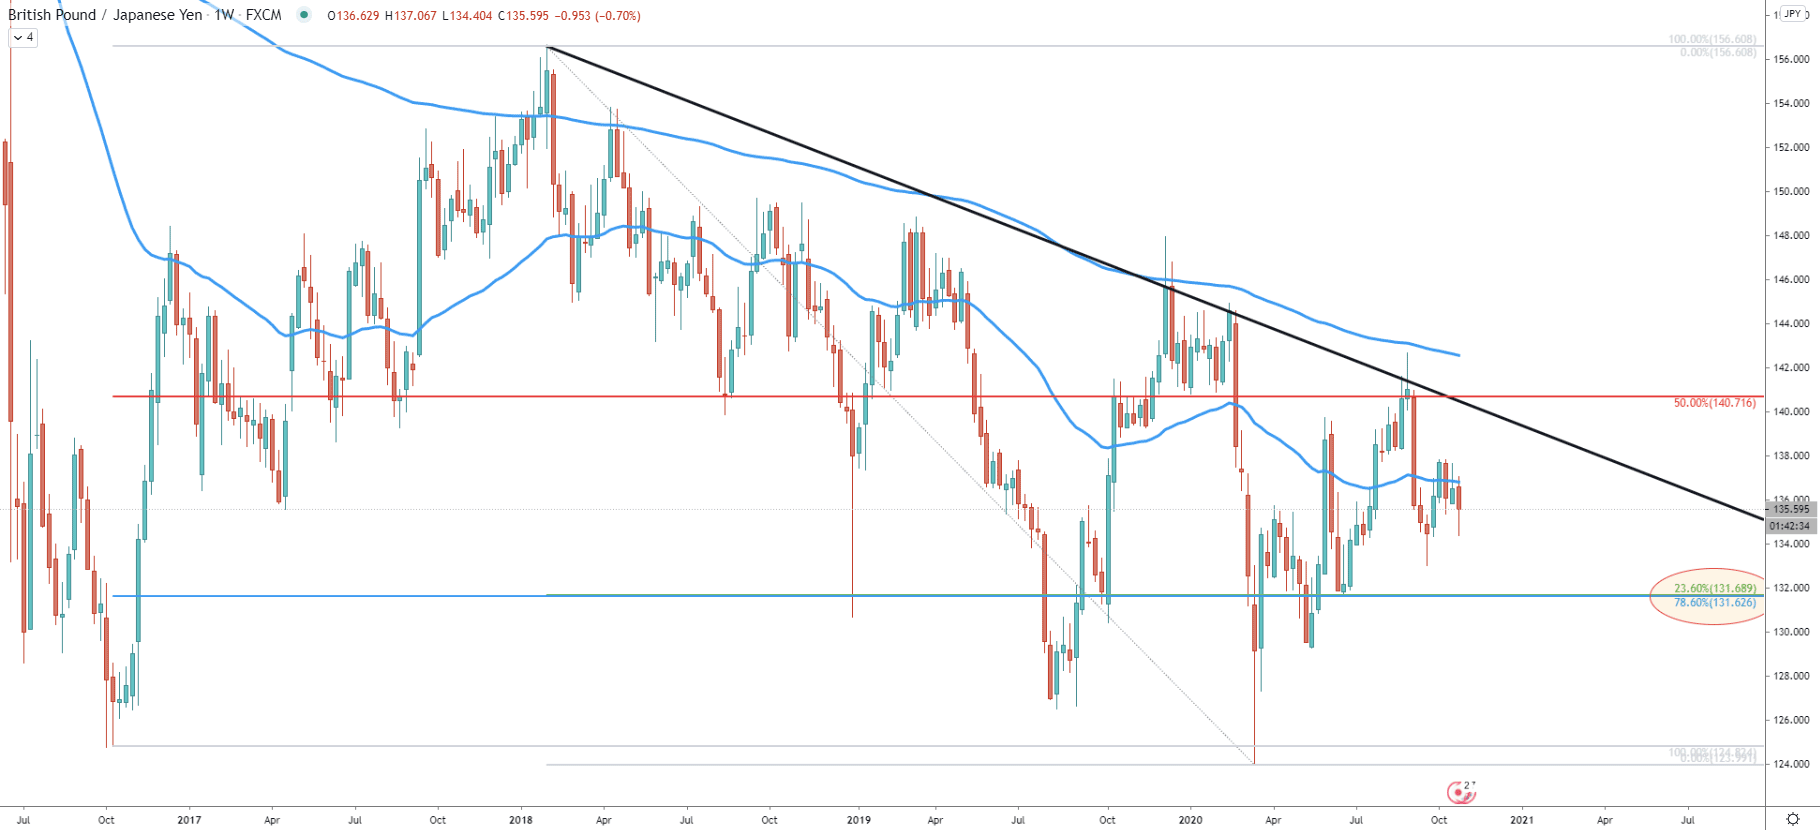 GBP/JPY Weekly Technical Analysis 30 Oct 2020